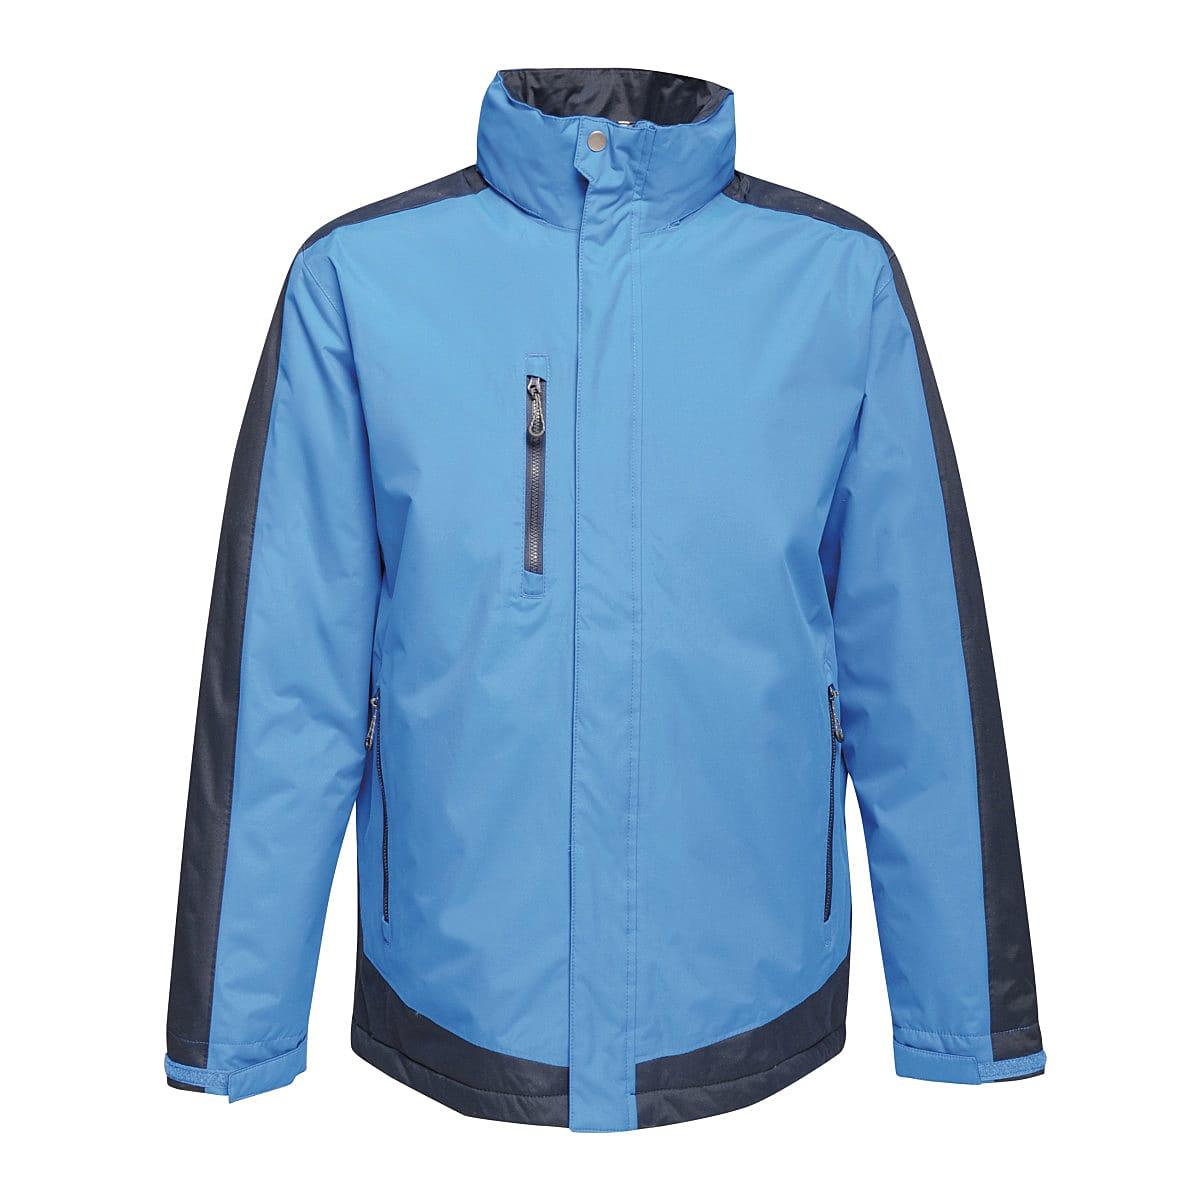 Regatta Mens Contrast Insulated Jacket in New Royal / Navy (Product Code: TRA312)